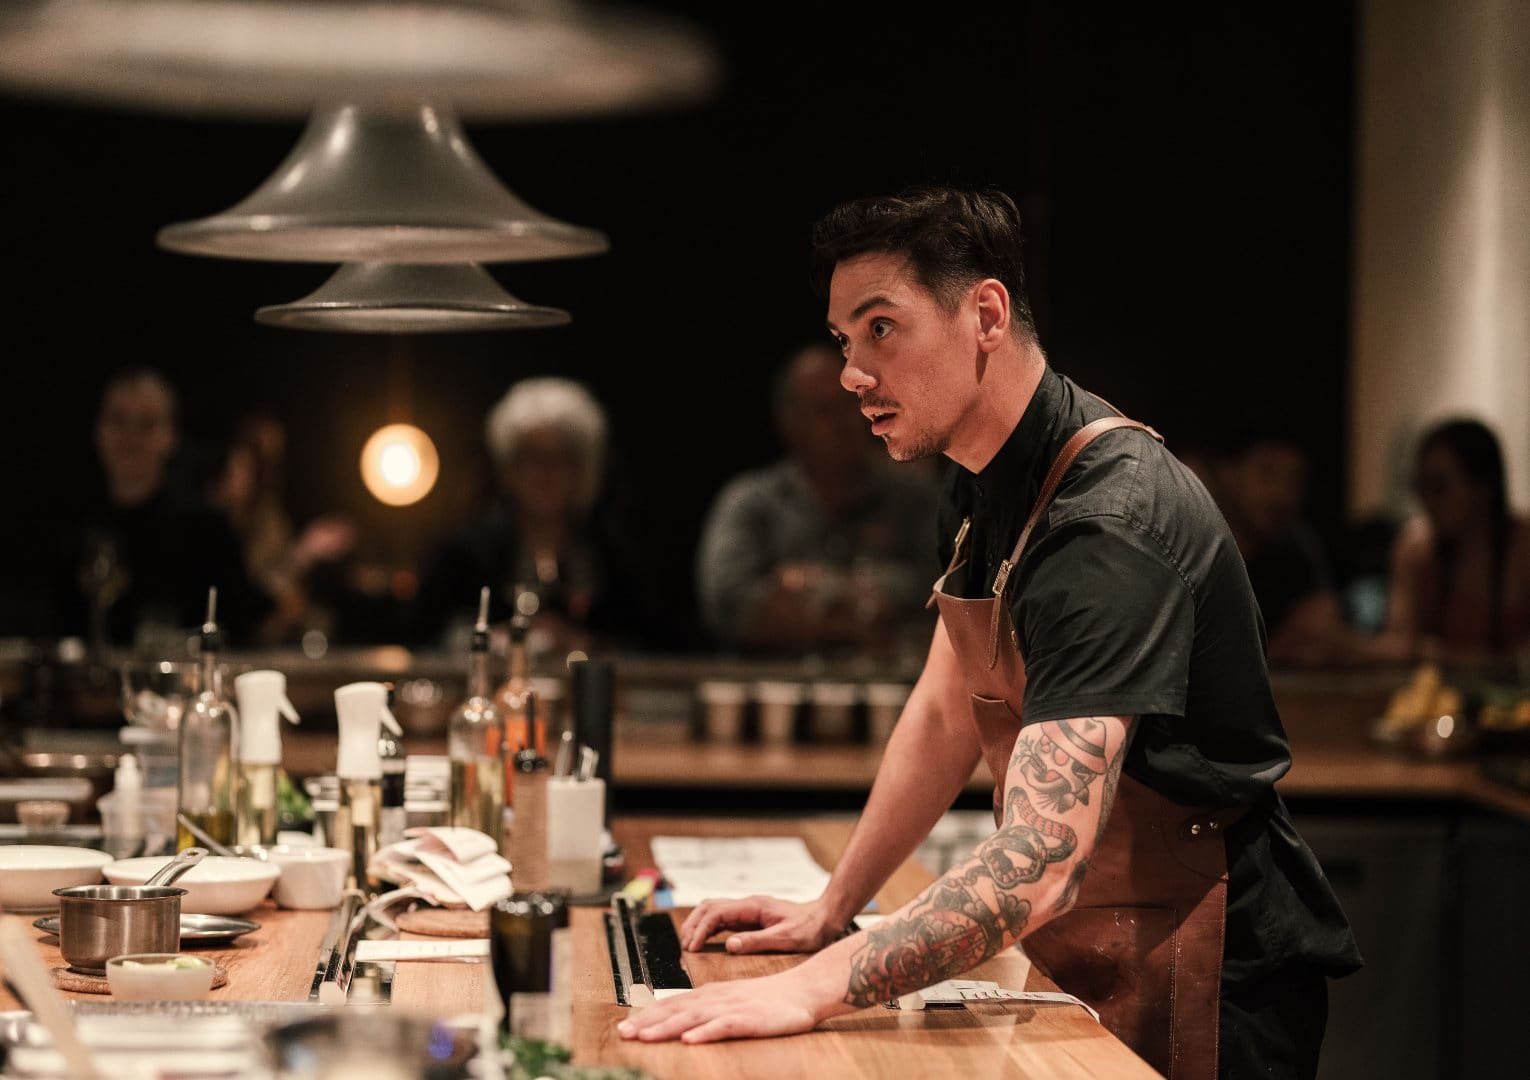 resident chef Jake Kellie prepares a feast at his open kitchen restaurant in Adelaide